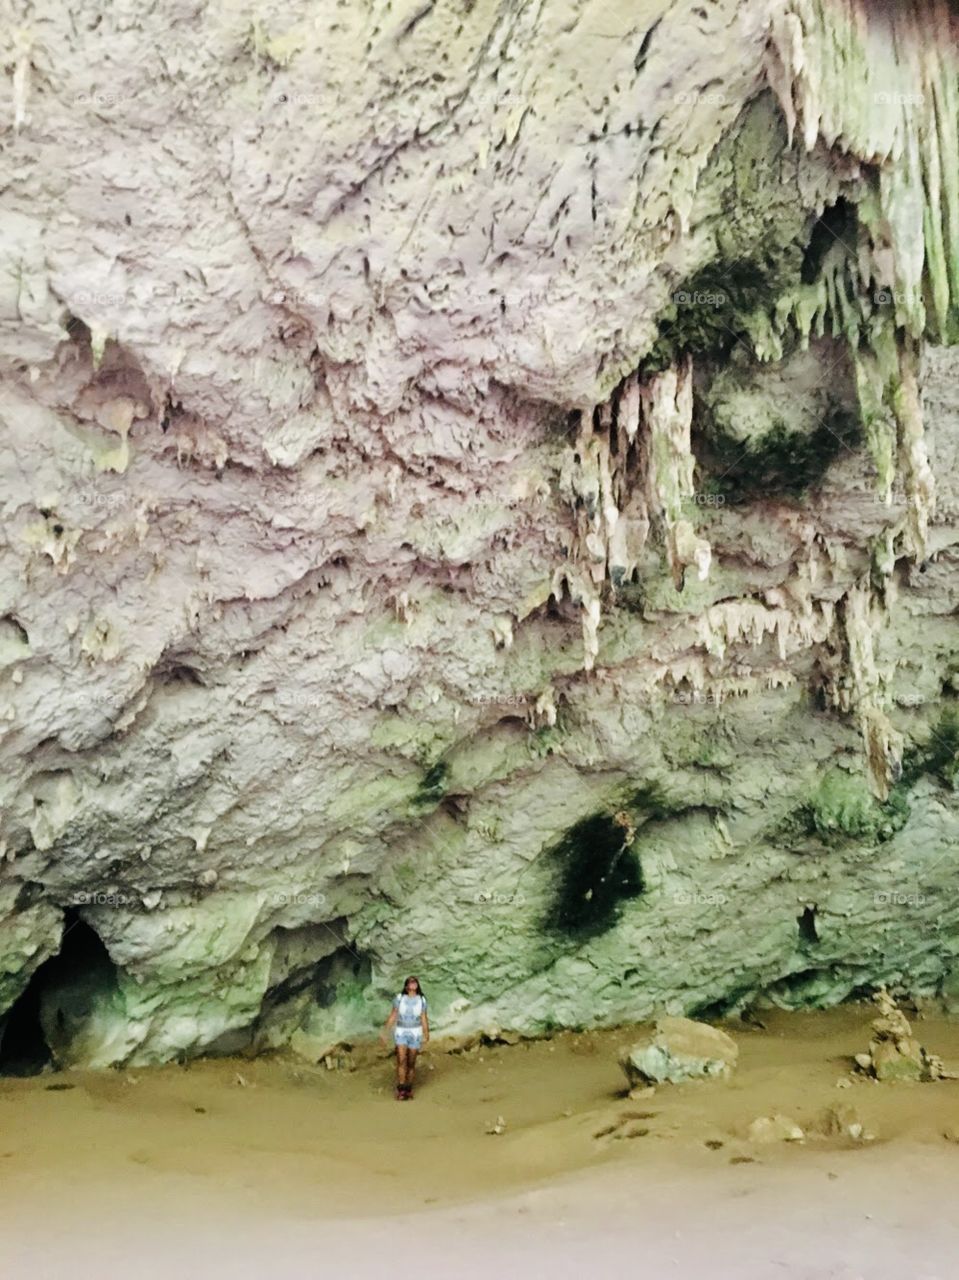 This cave in Hua Hin was so big that it made you feel so small. There were many types of rock formations and minerals as well. 